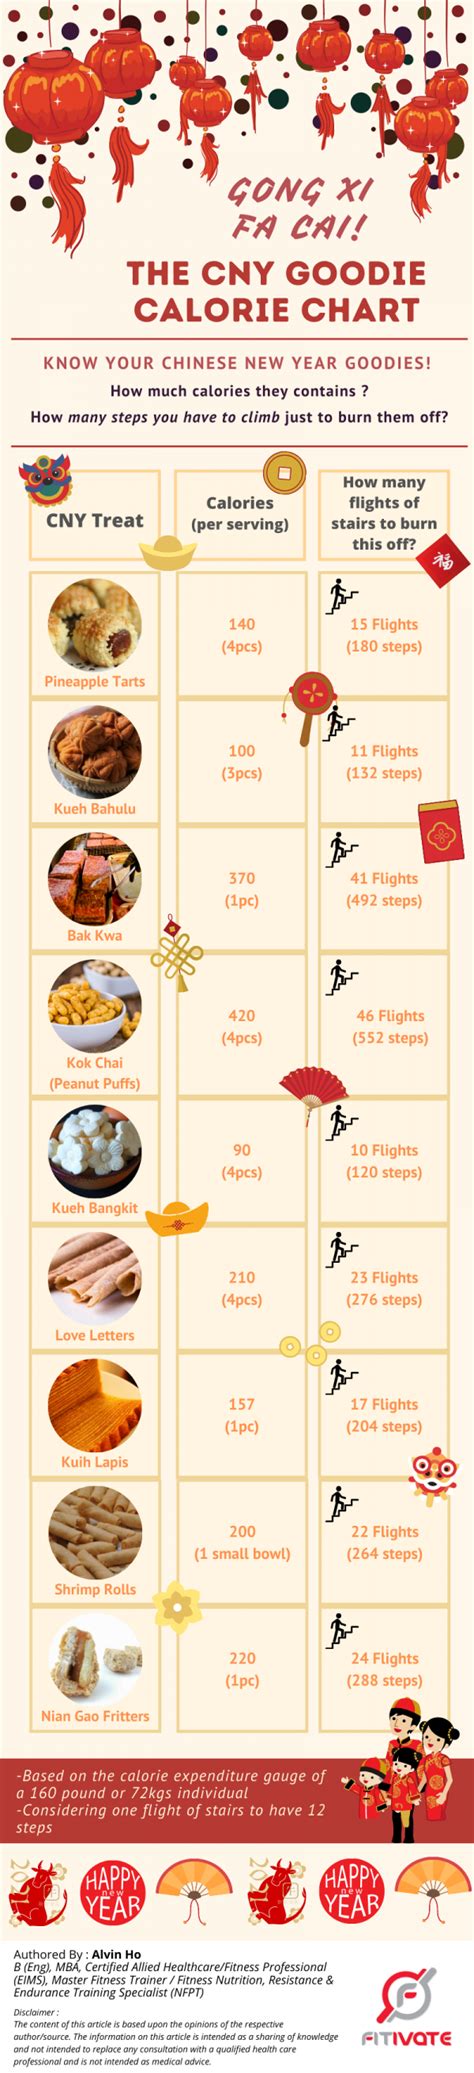 know the calories of your cny treat fitivate